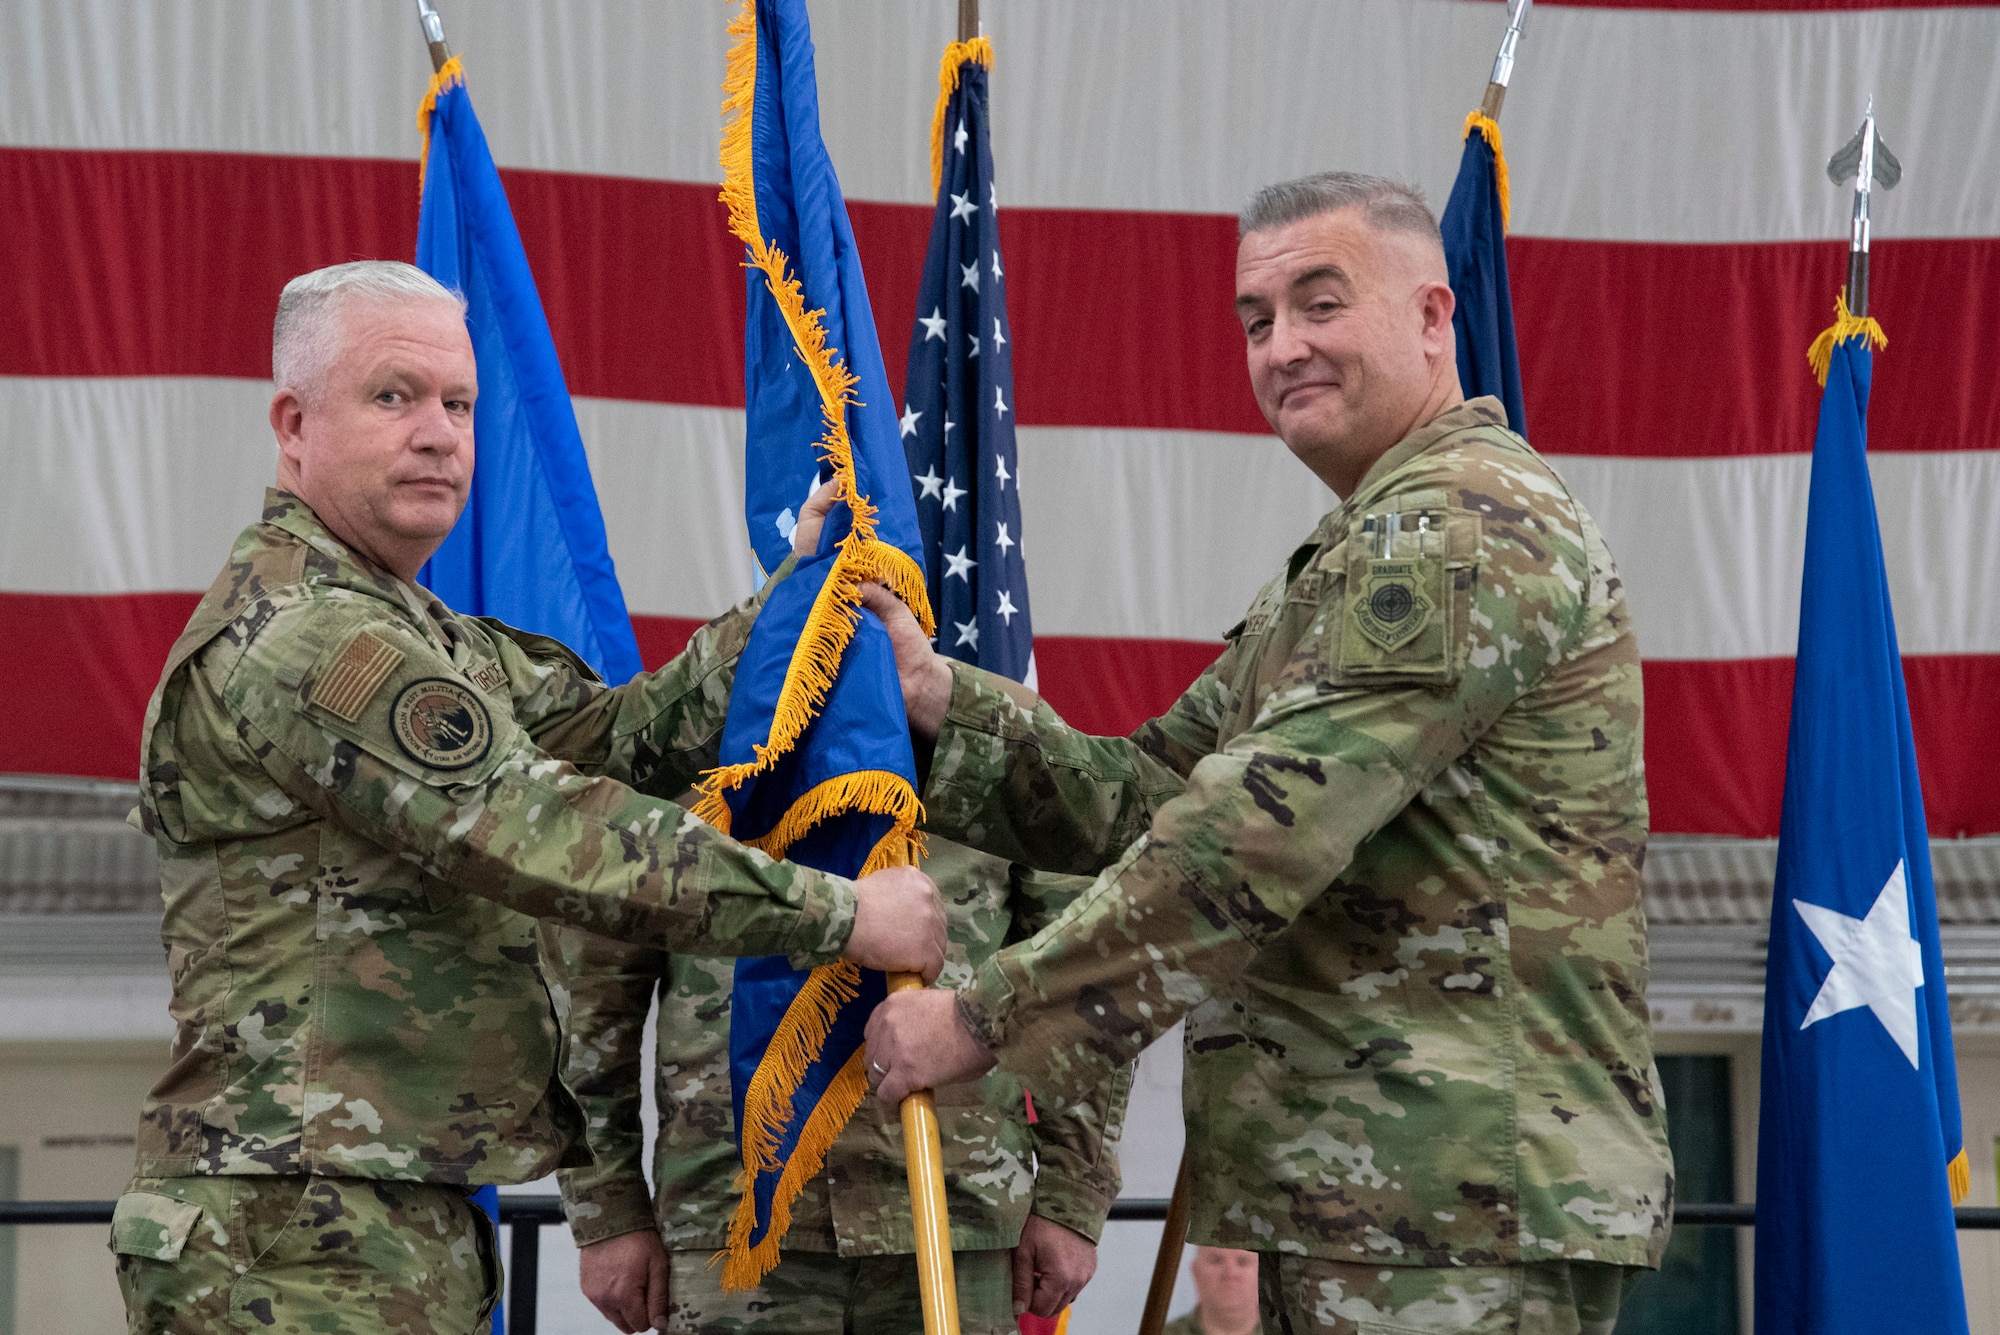 Members of the 151st Wing celebrate the Change of Command and redesignation.